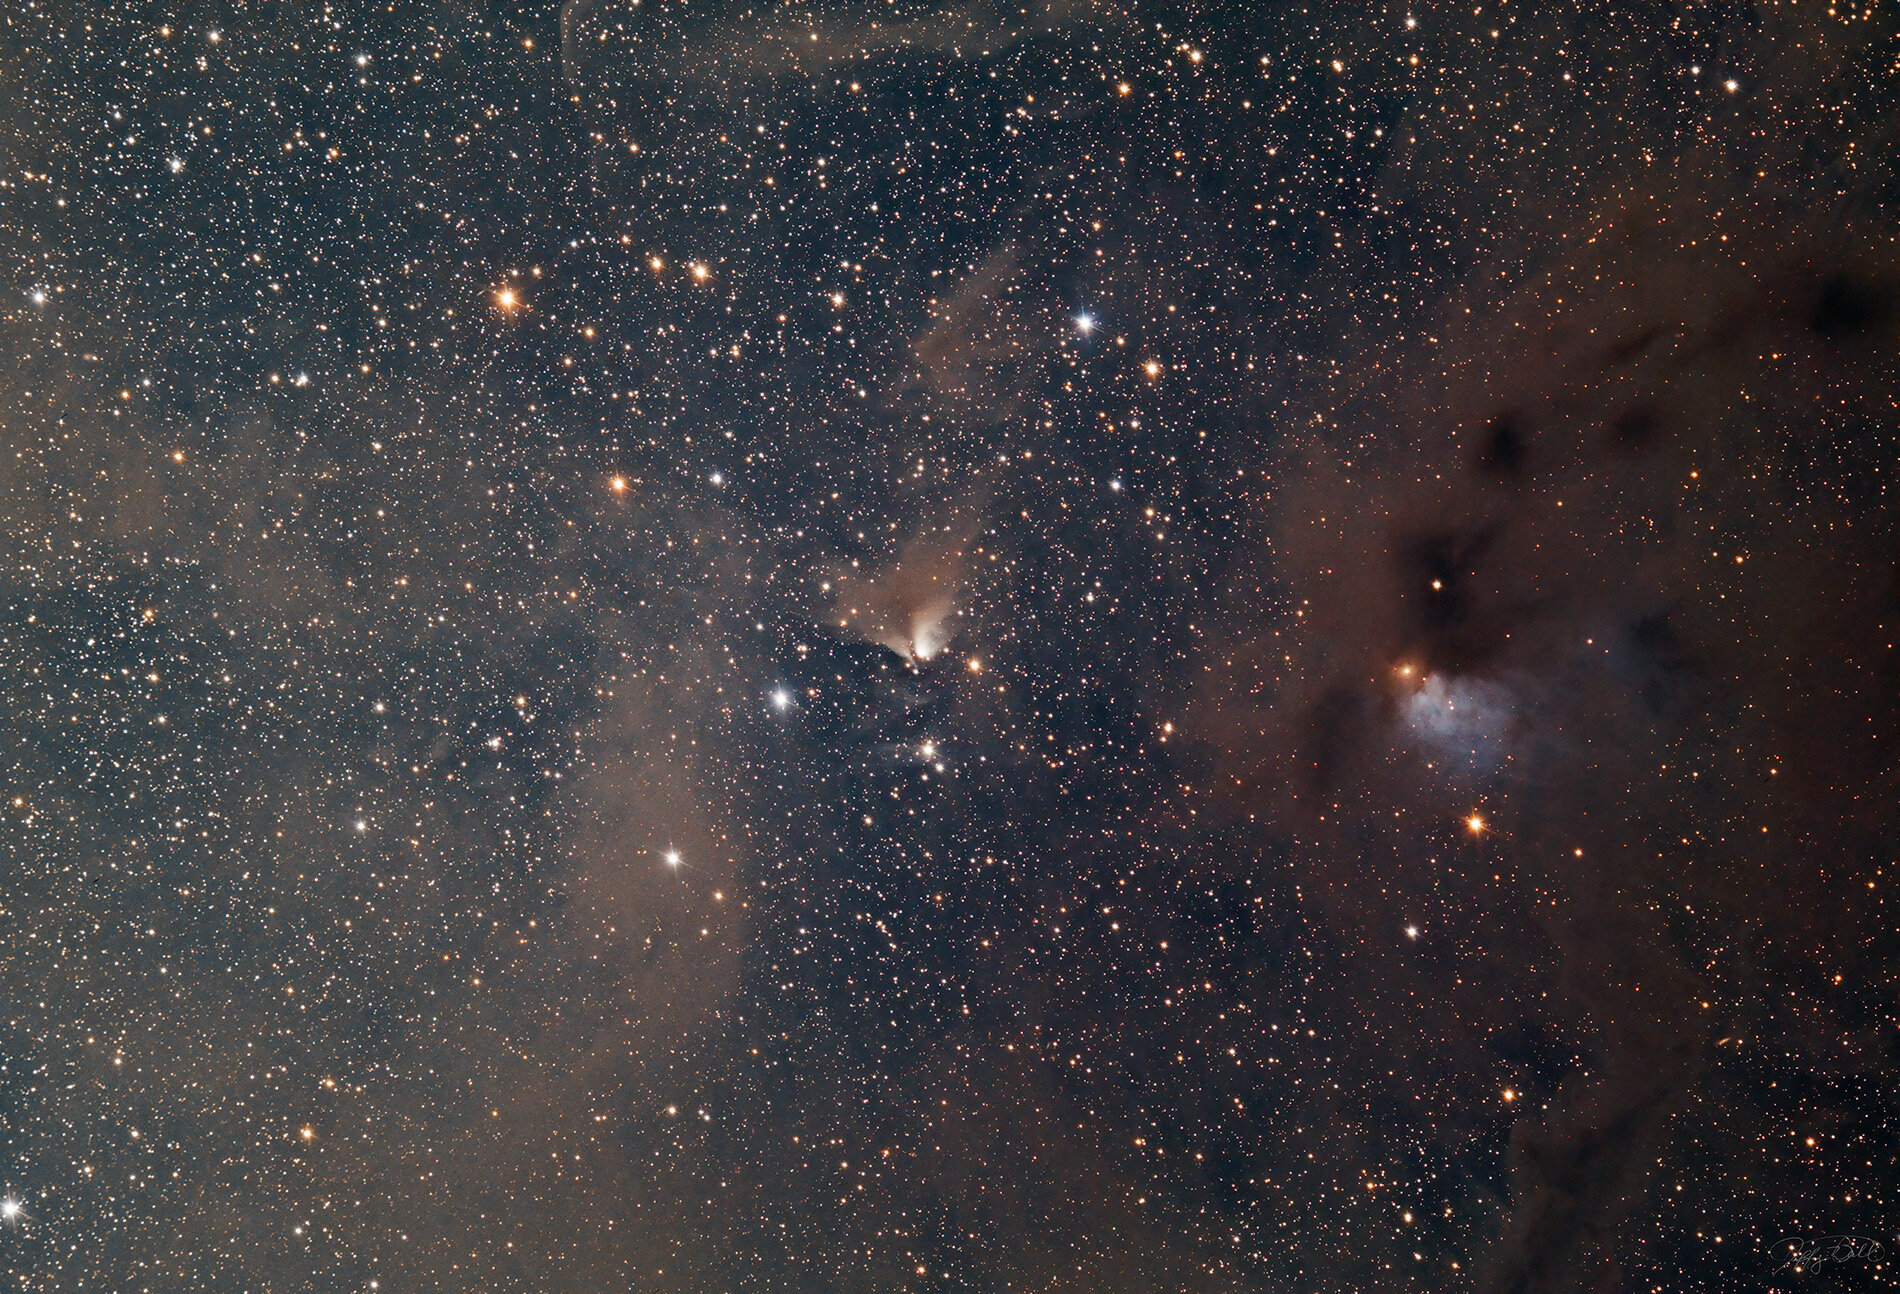 A portion from Barnard Plate #5 featuring B214 in the center.  Other dark nebula include B 7, B210, B209, B211, and B213.